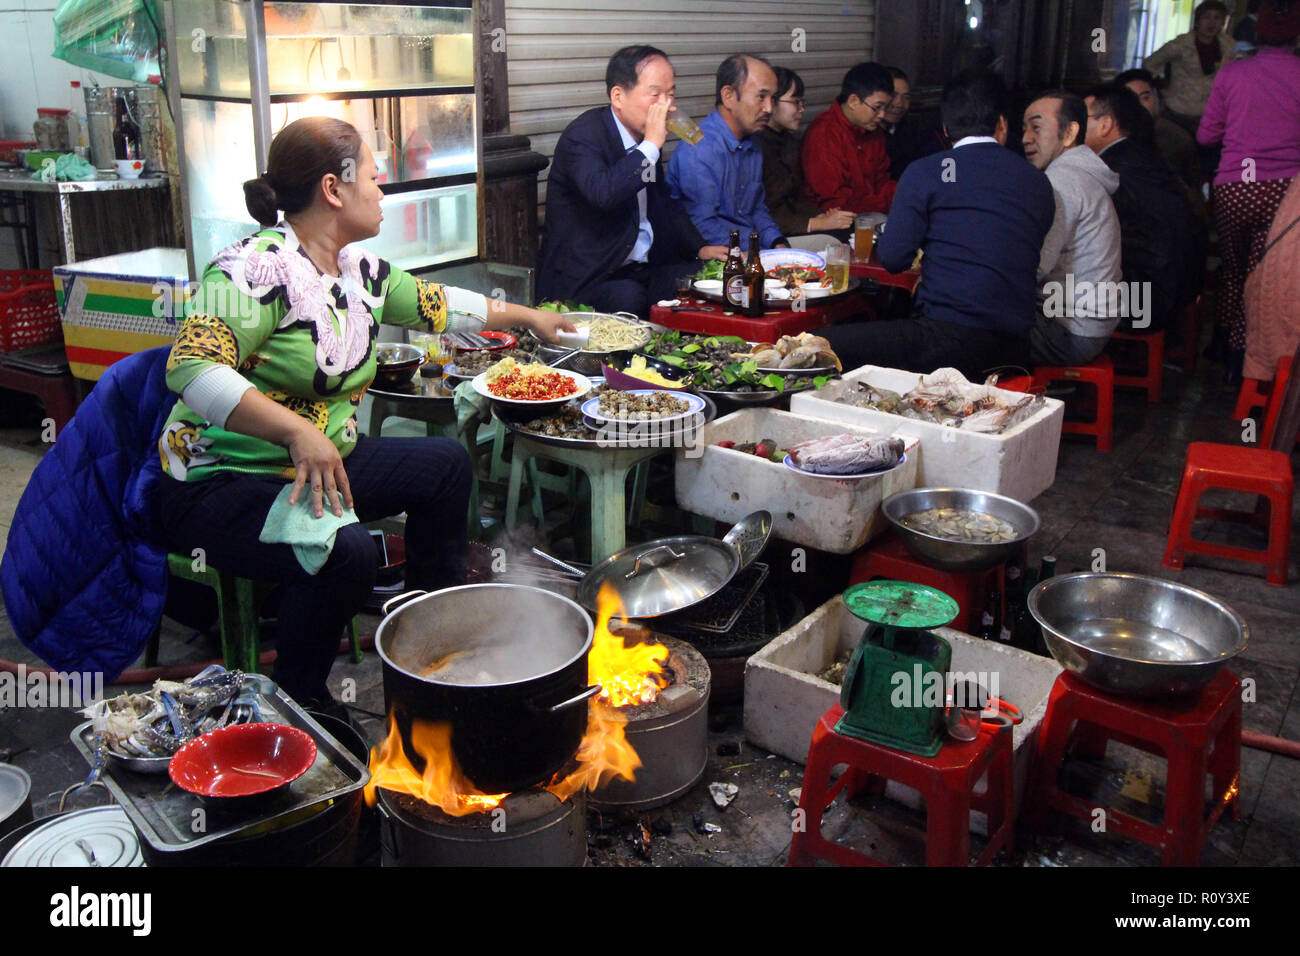 Group of men patronize a sidewalk eating establishment while the proprietor cooks over an open flame in Hanoi, Vietnam Stock Photo